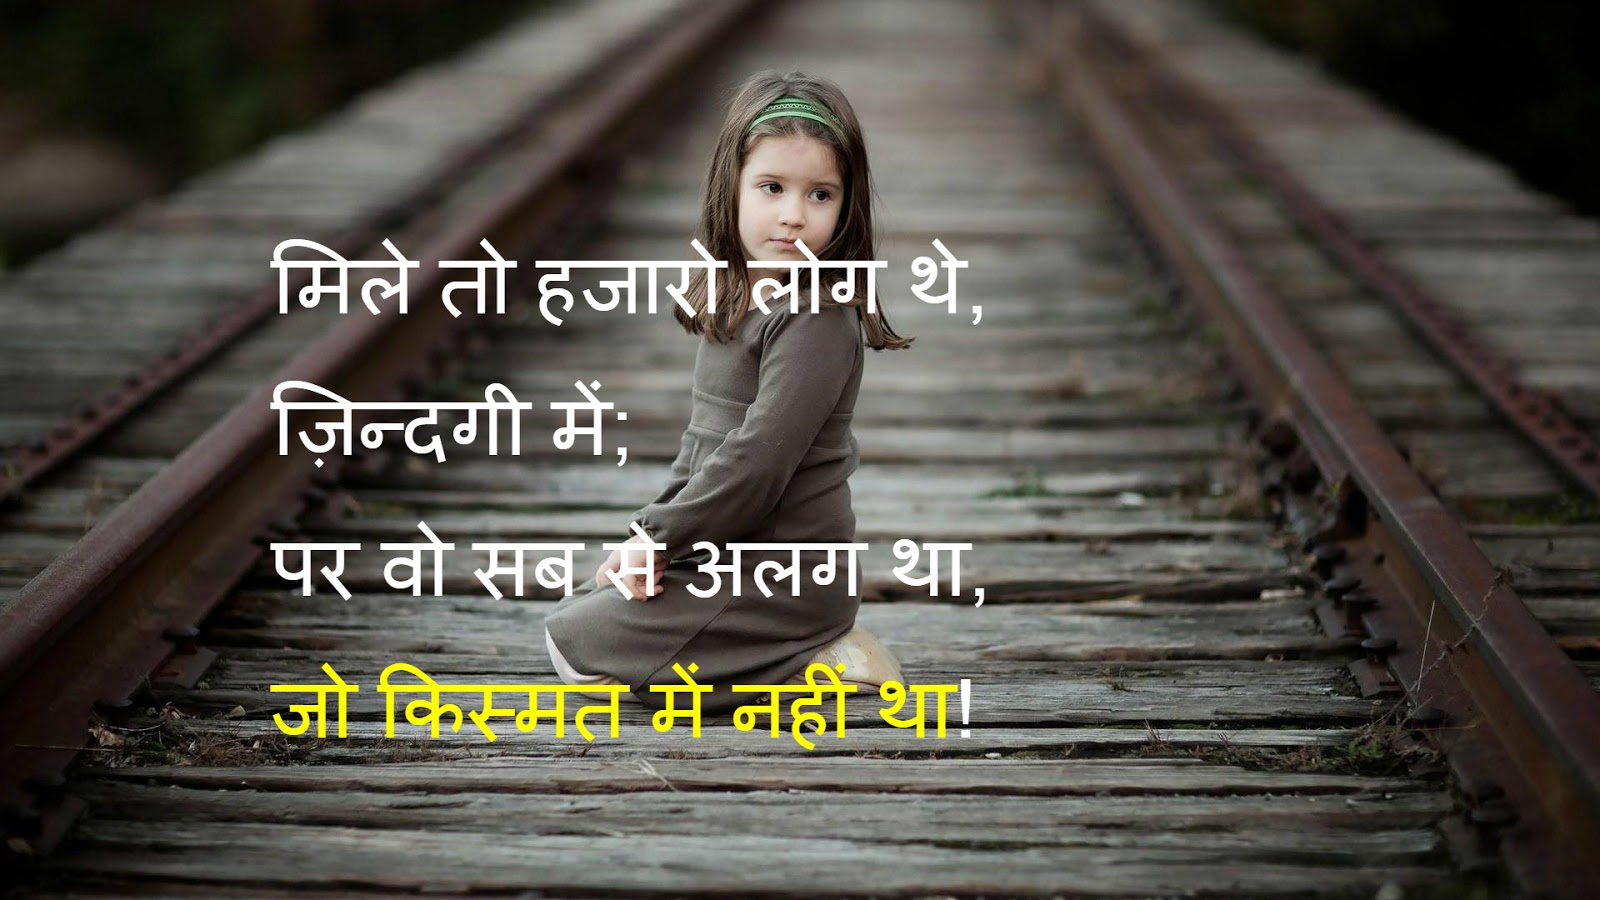 collection of best hindi shayari images latest best new images funny images whatsapp status whatsapp jokes